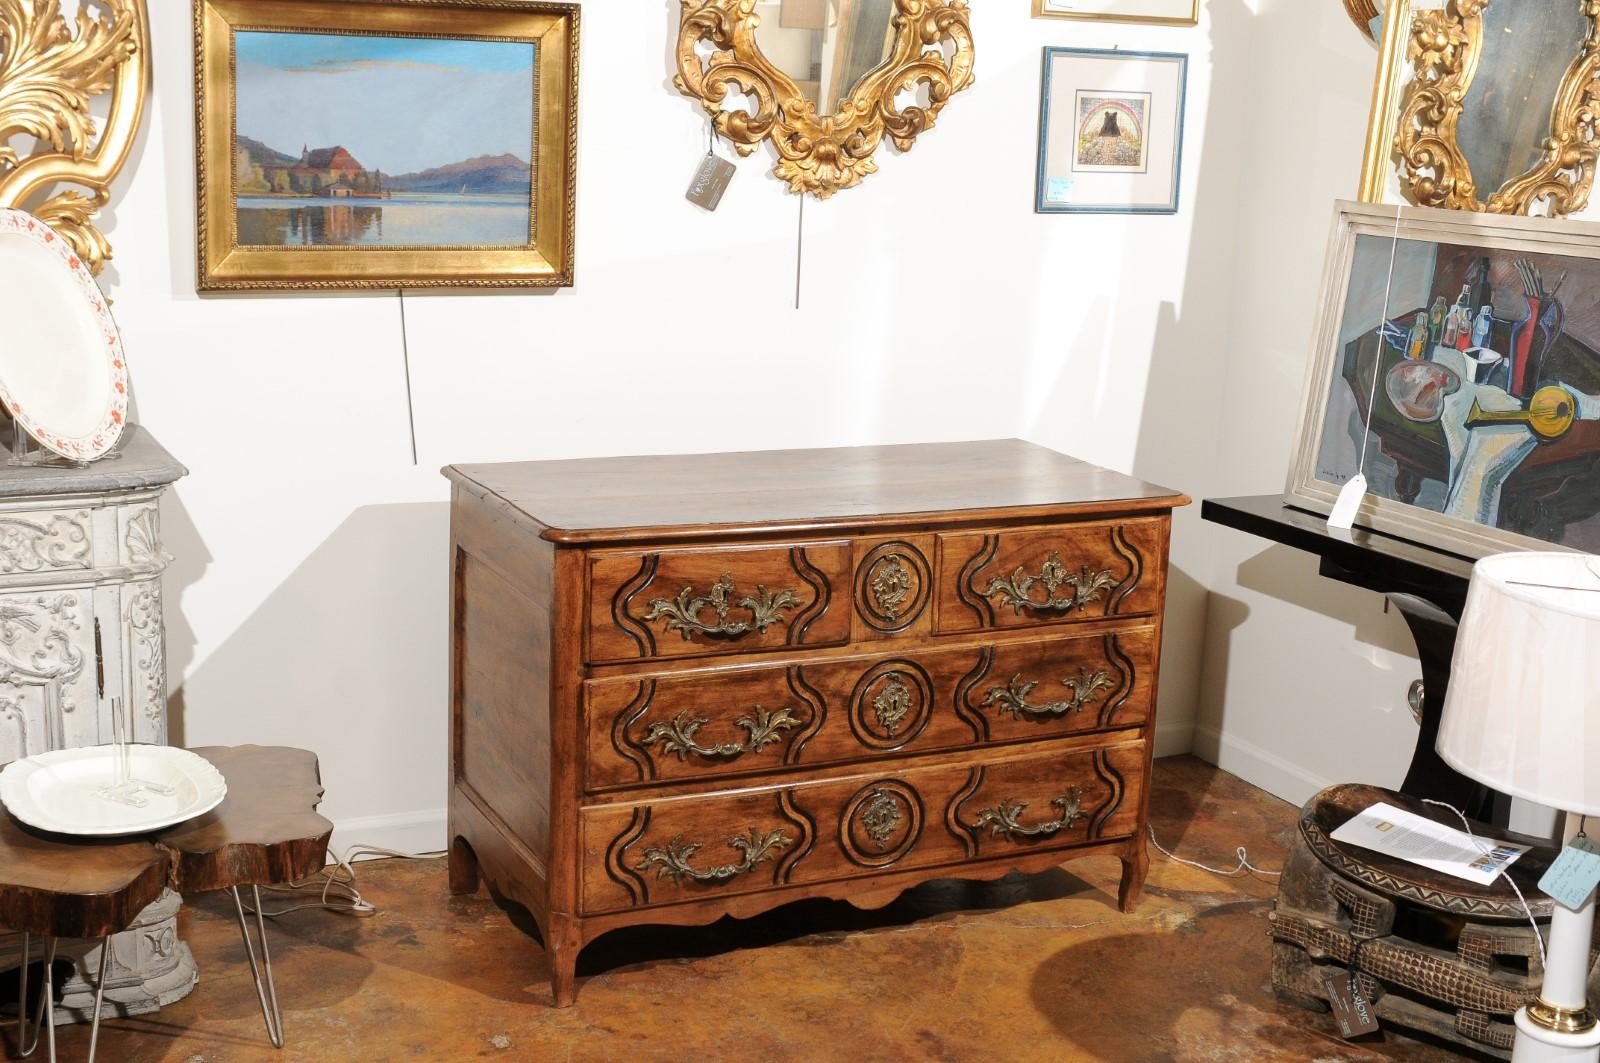 Carved French Napoleon III Period Parisienne Commode with Four Drawers, circa 1850